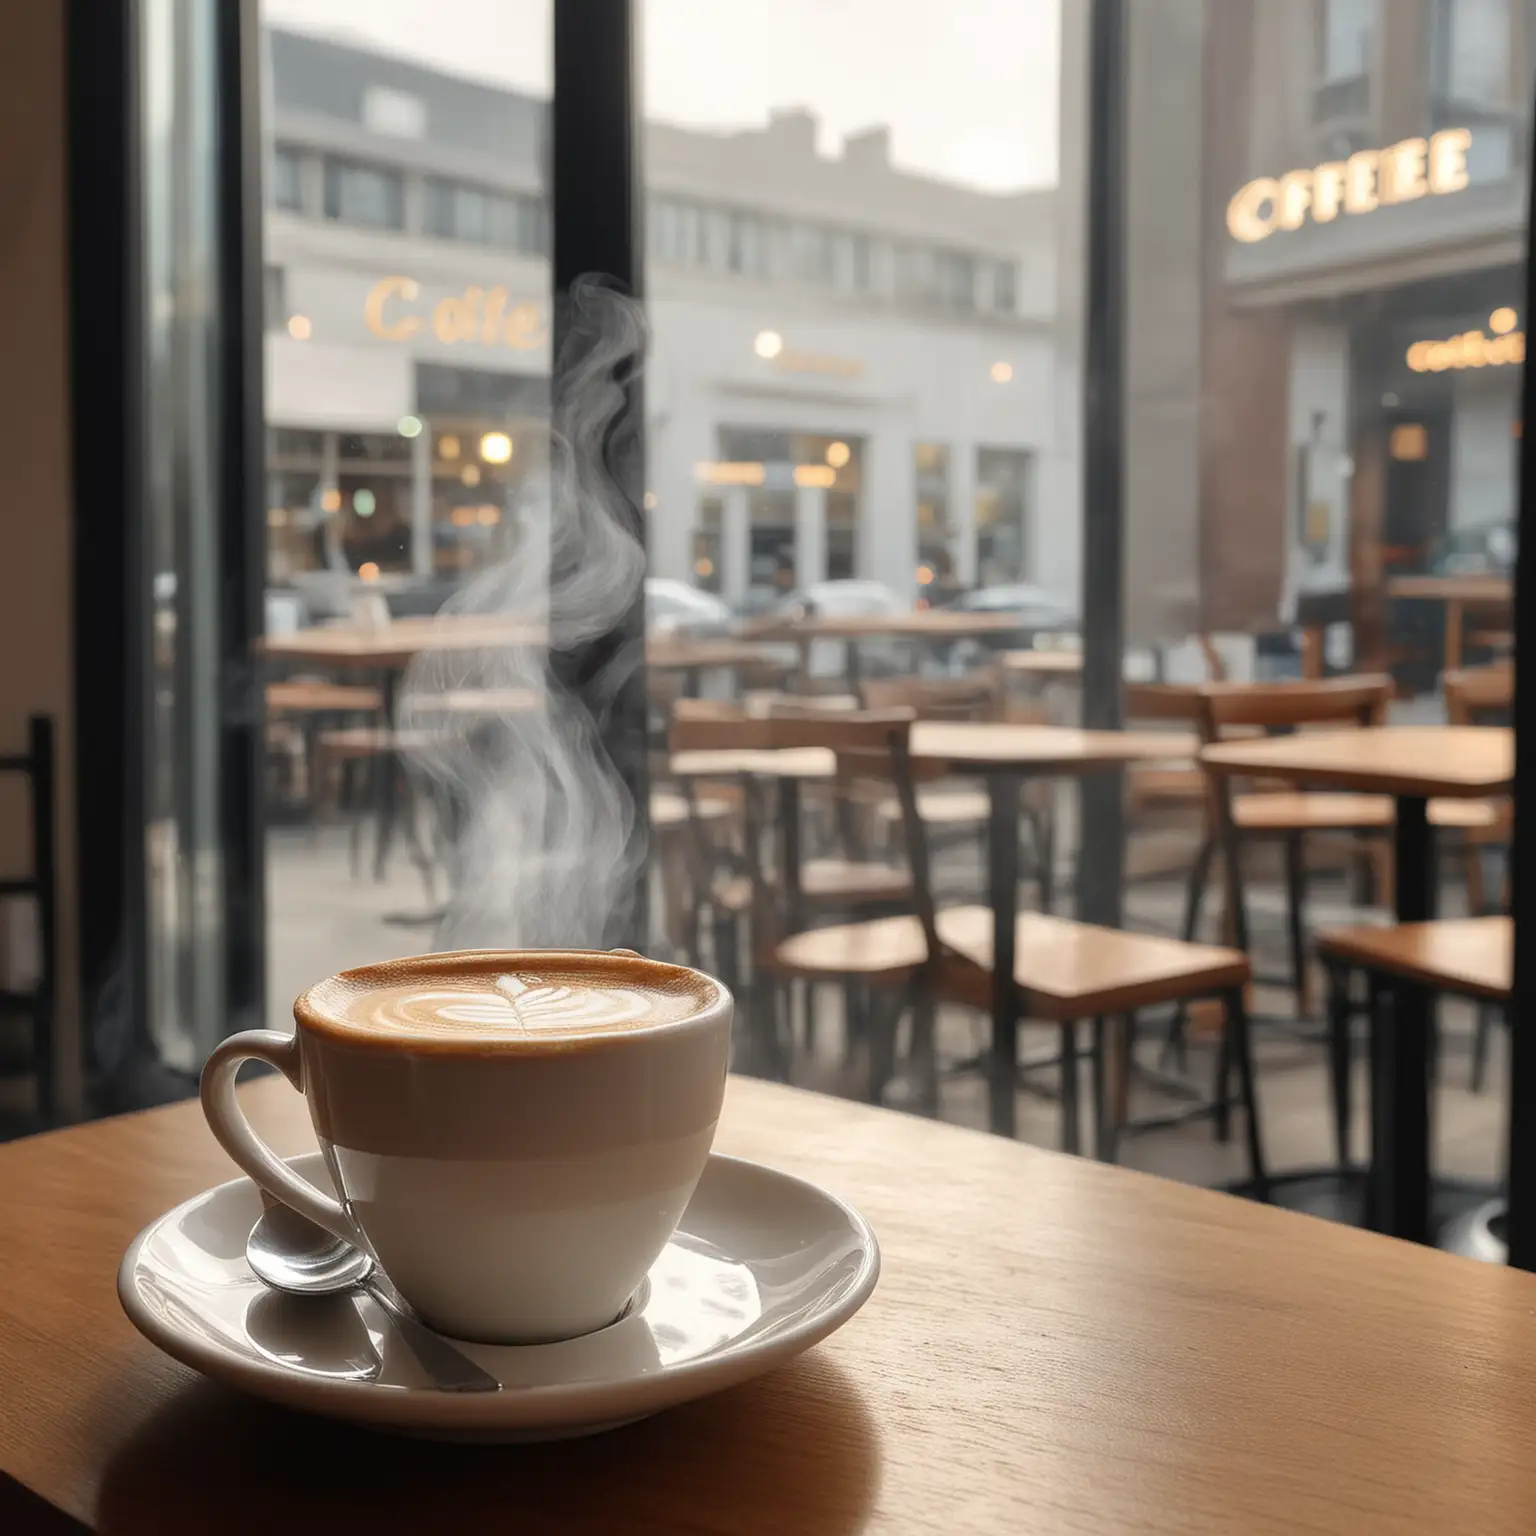 Steaming Cup of Coffee in Modern Coffee Shop Setting